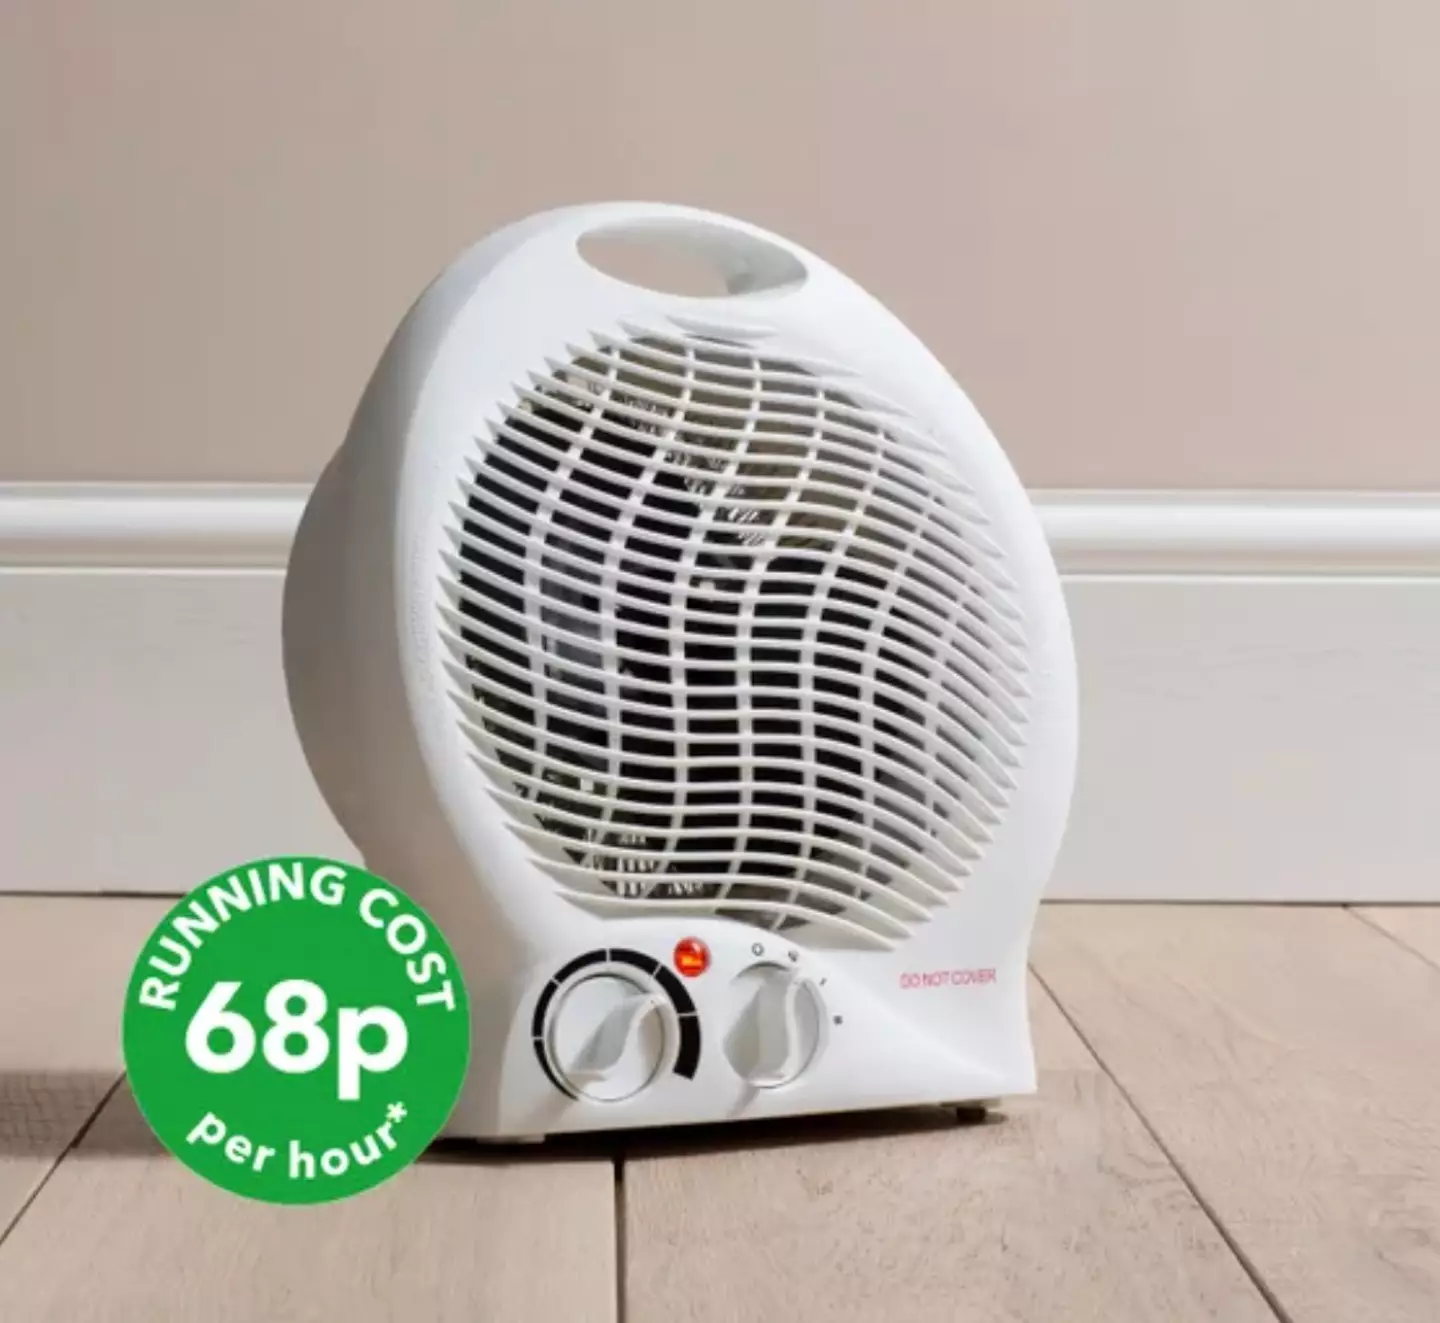 People are raving about Dunelm's heater.